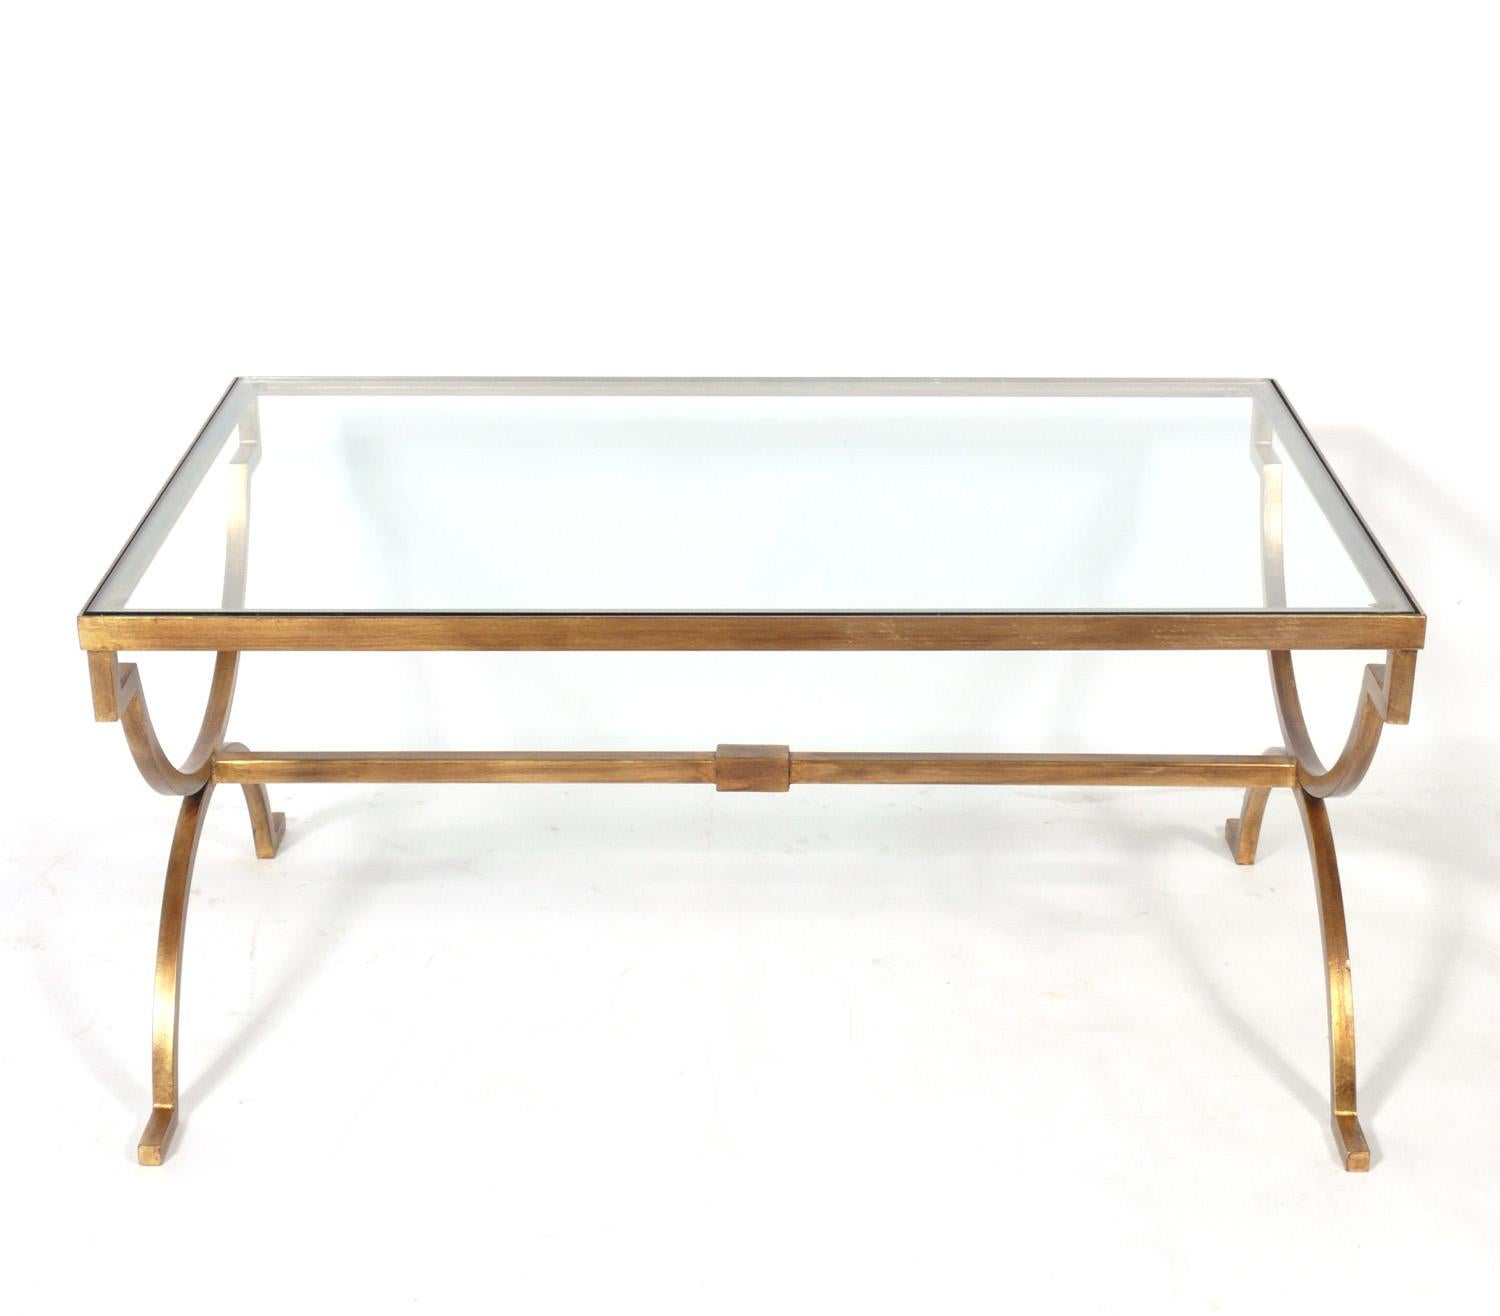 Gilt metal coffee table, American, circa 2000s. Based on a 1930s French Art Deco design, this table is constructed of gilt metal with an inset glass top.